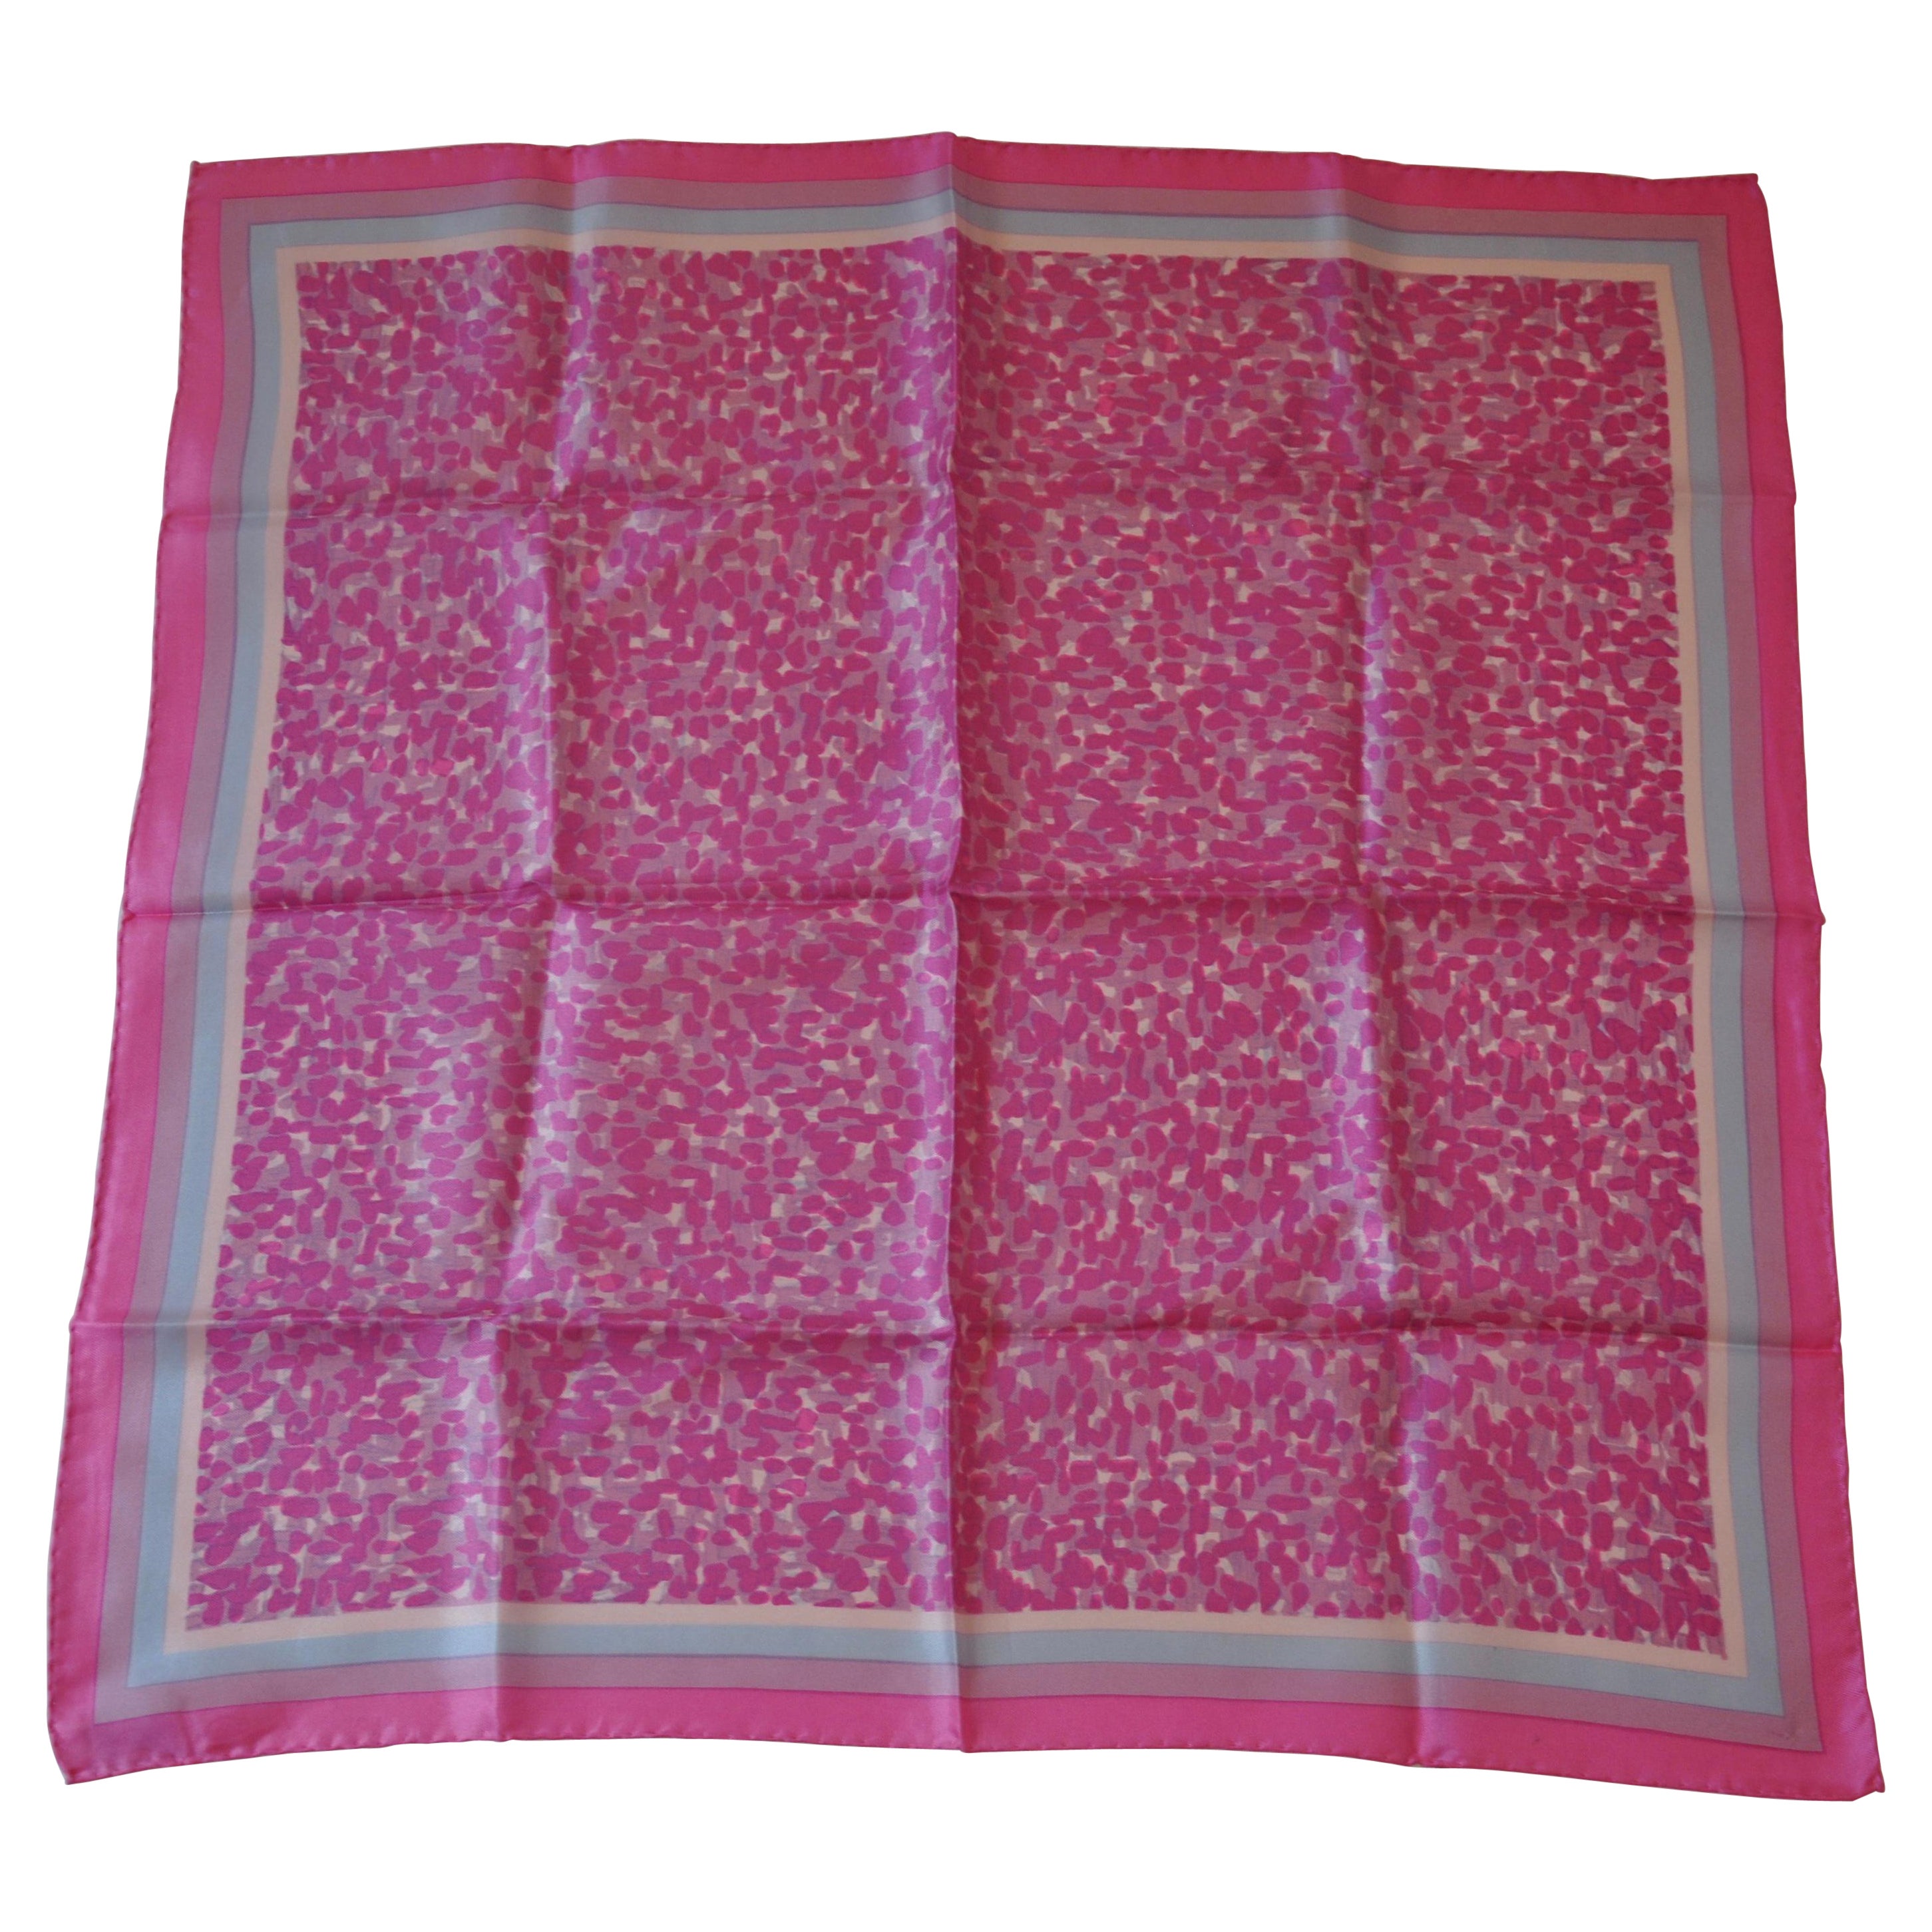 Lovely Shades of Fuchsia Specks Accented with Lavender Striped Border Silk Scarf